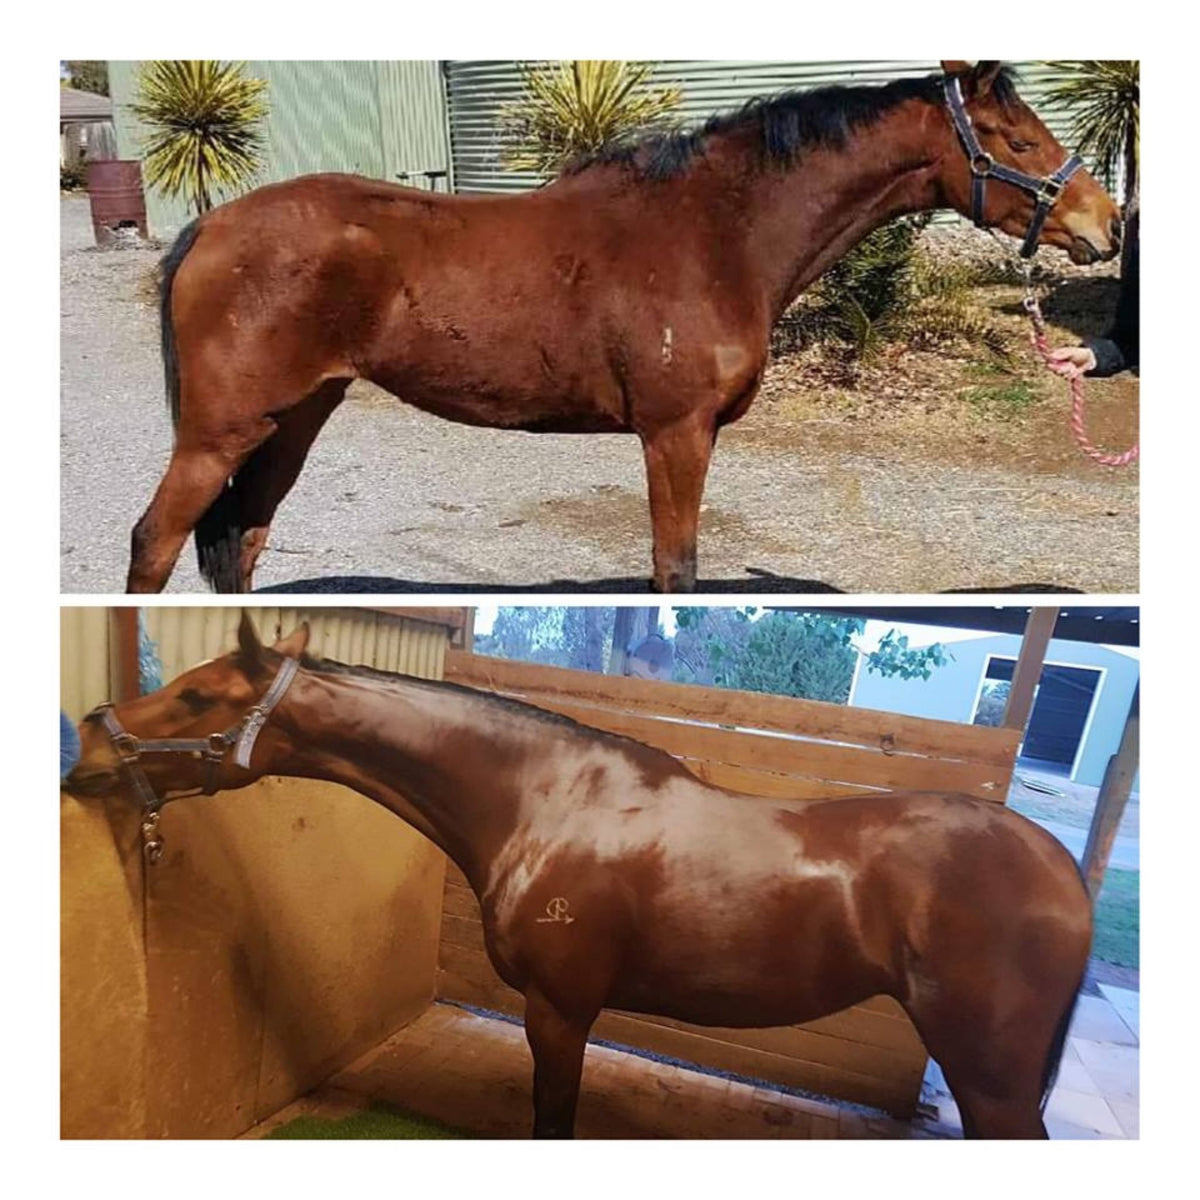 Images of bay horse before and after use of Digestive EQ.